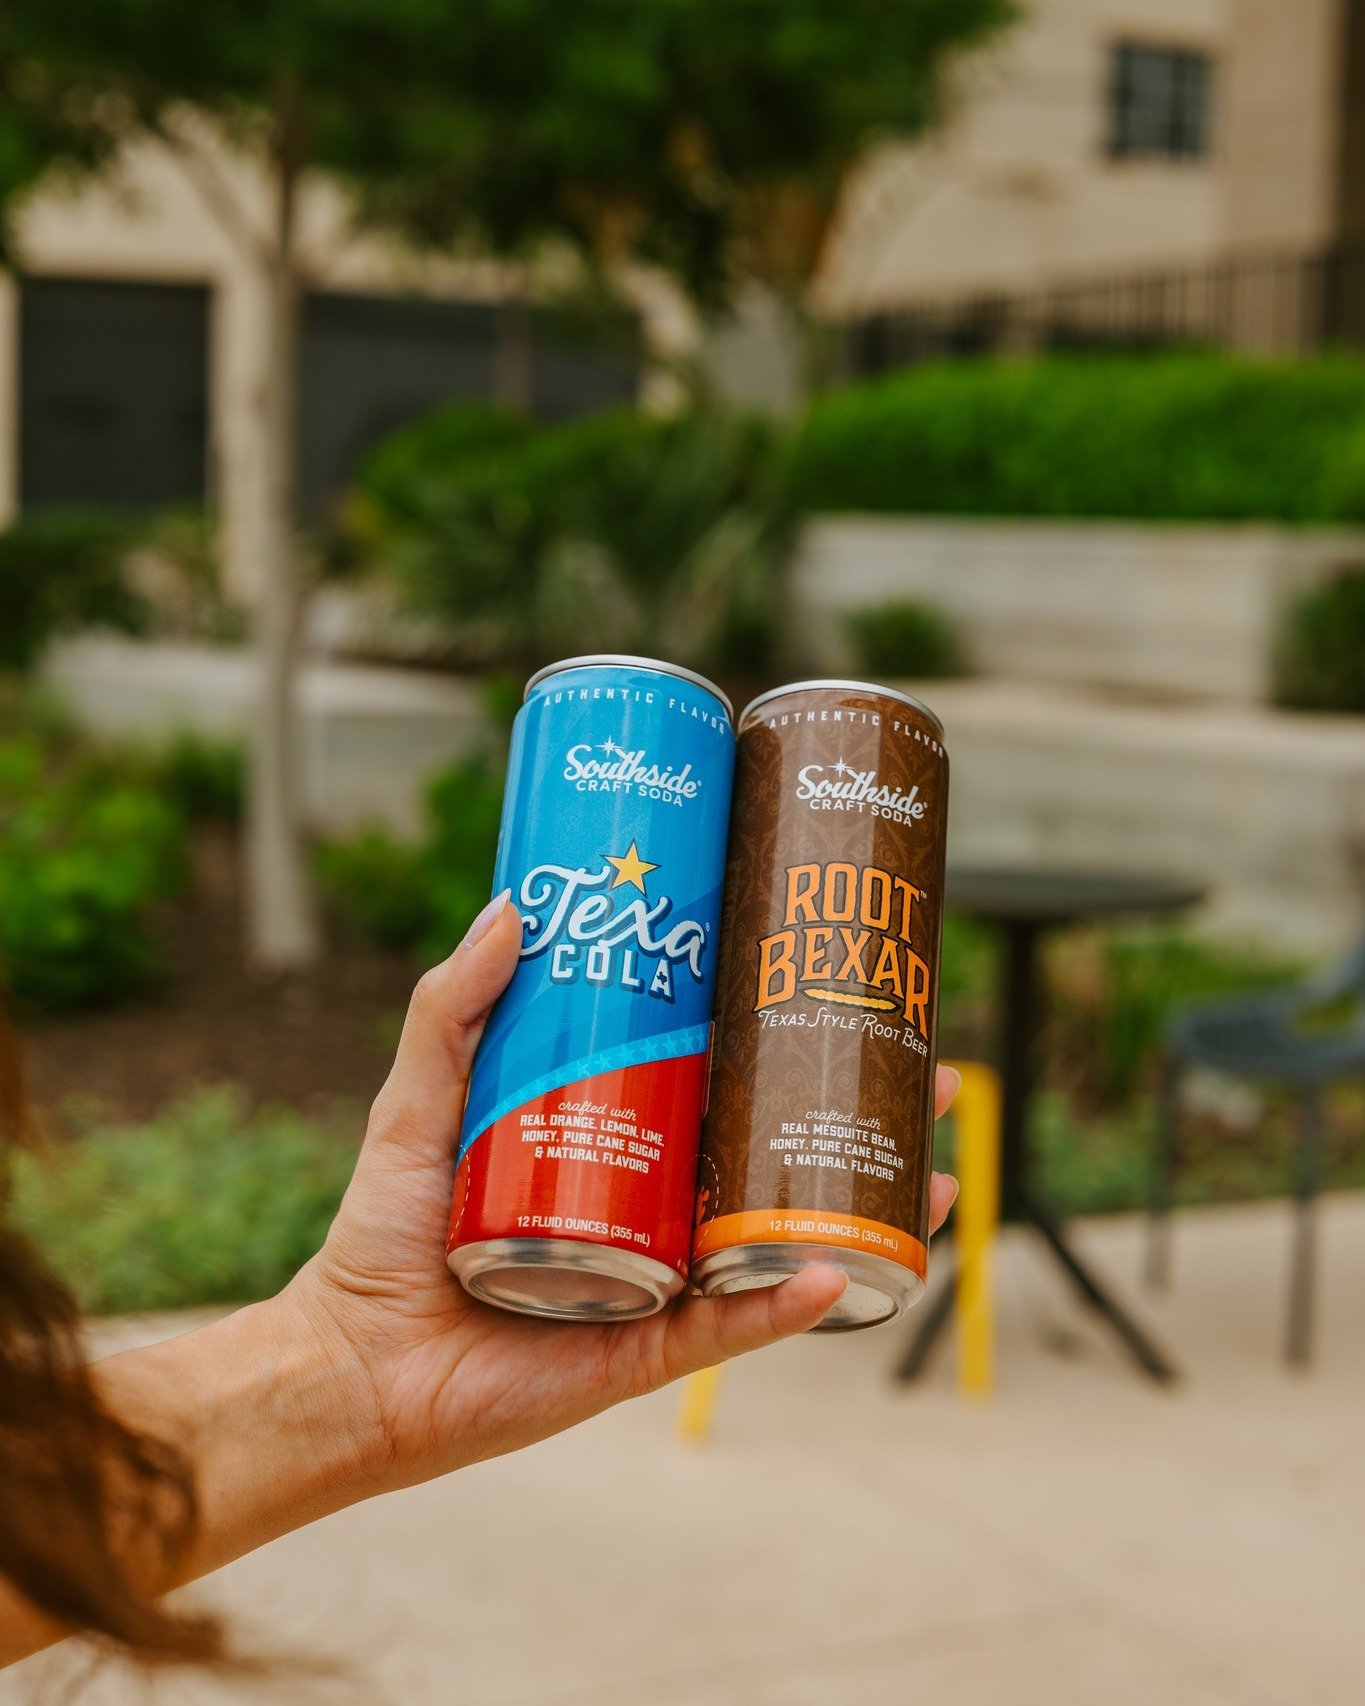 Dive into the local flavor with @southsidecraftsoda proudly served at Garaje Cantina. Experience the essence of Texas with Texas Cola, vibrant Limoncito, and hometown favorite Root Bexar flavors. Perfect for sharing good times with everyone!

Availab